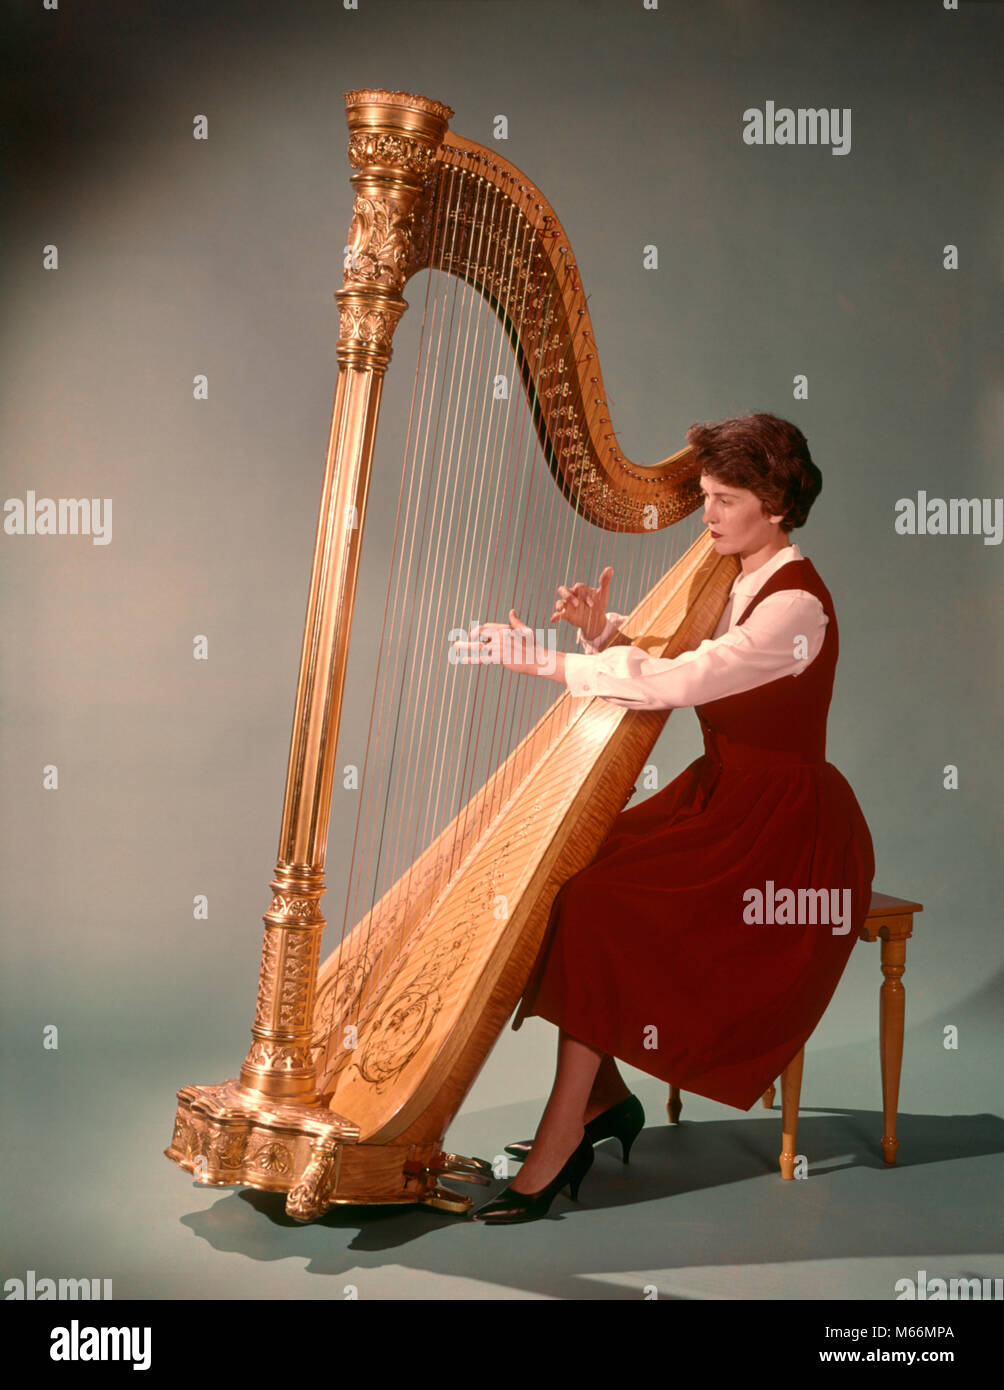 https://c8.alamy.com/comp/M66MPA/1960s-woman-playing-large-golden-concert-or-pedal-chromatic-harp-km784-M66MPA.jpg